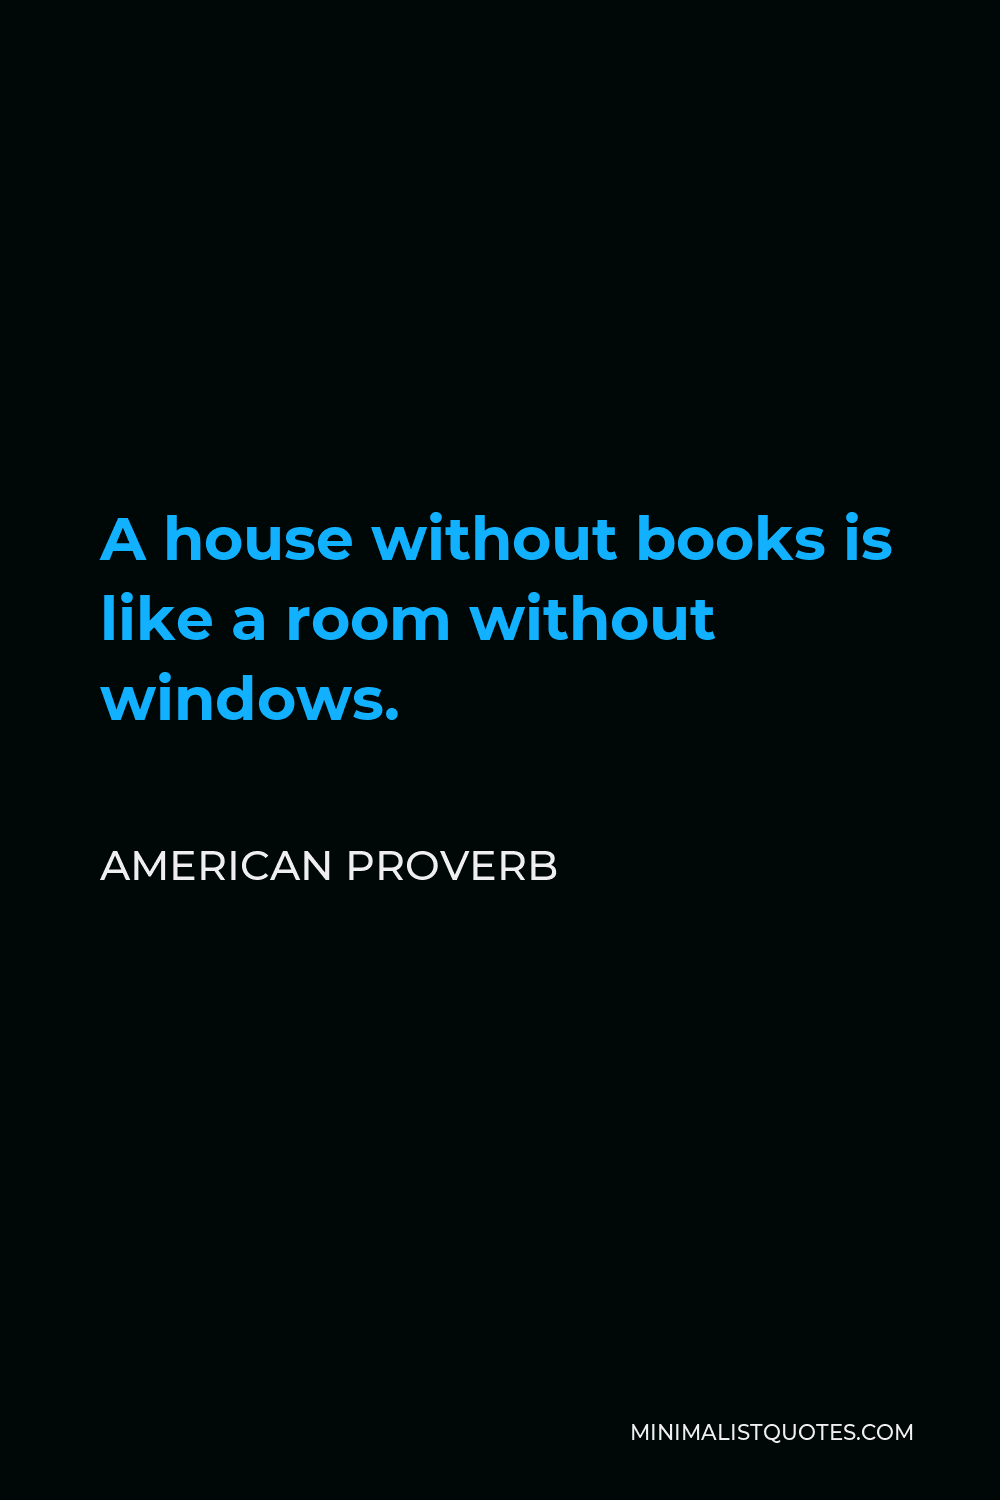 American Proverb Quote - A house without books is like a room without windows.